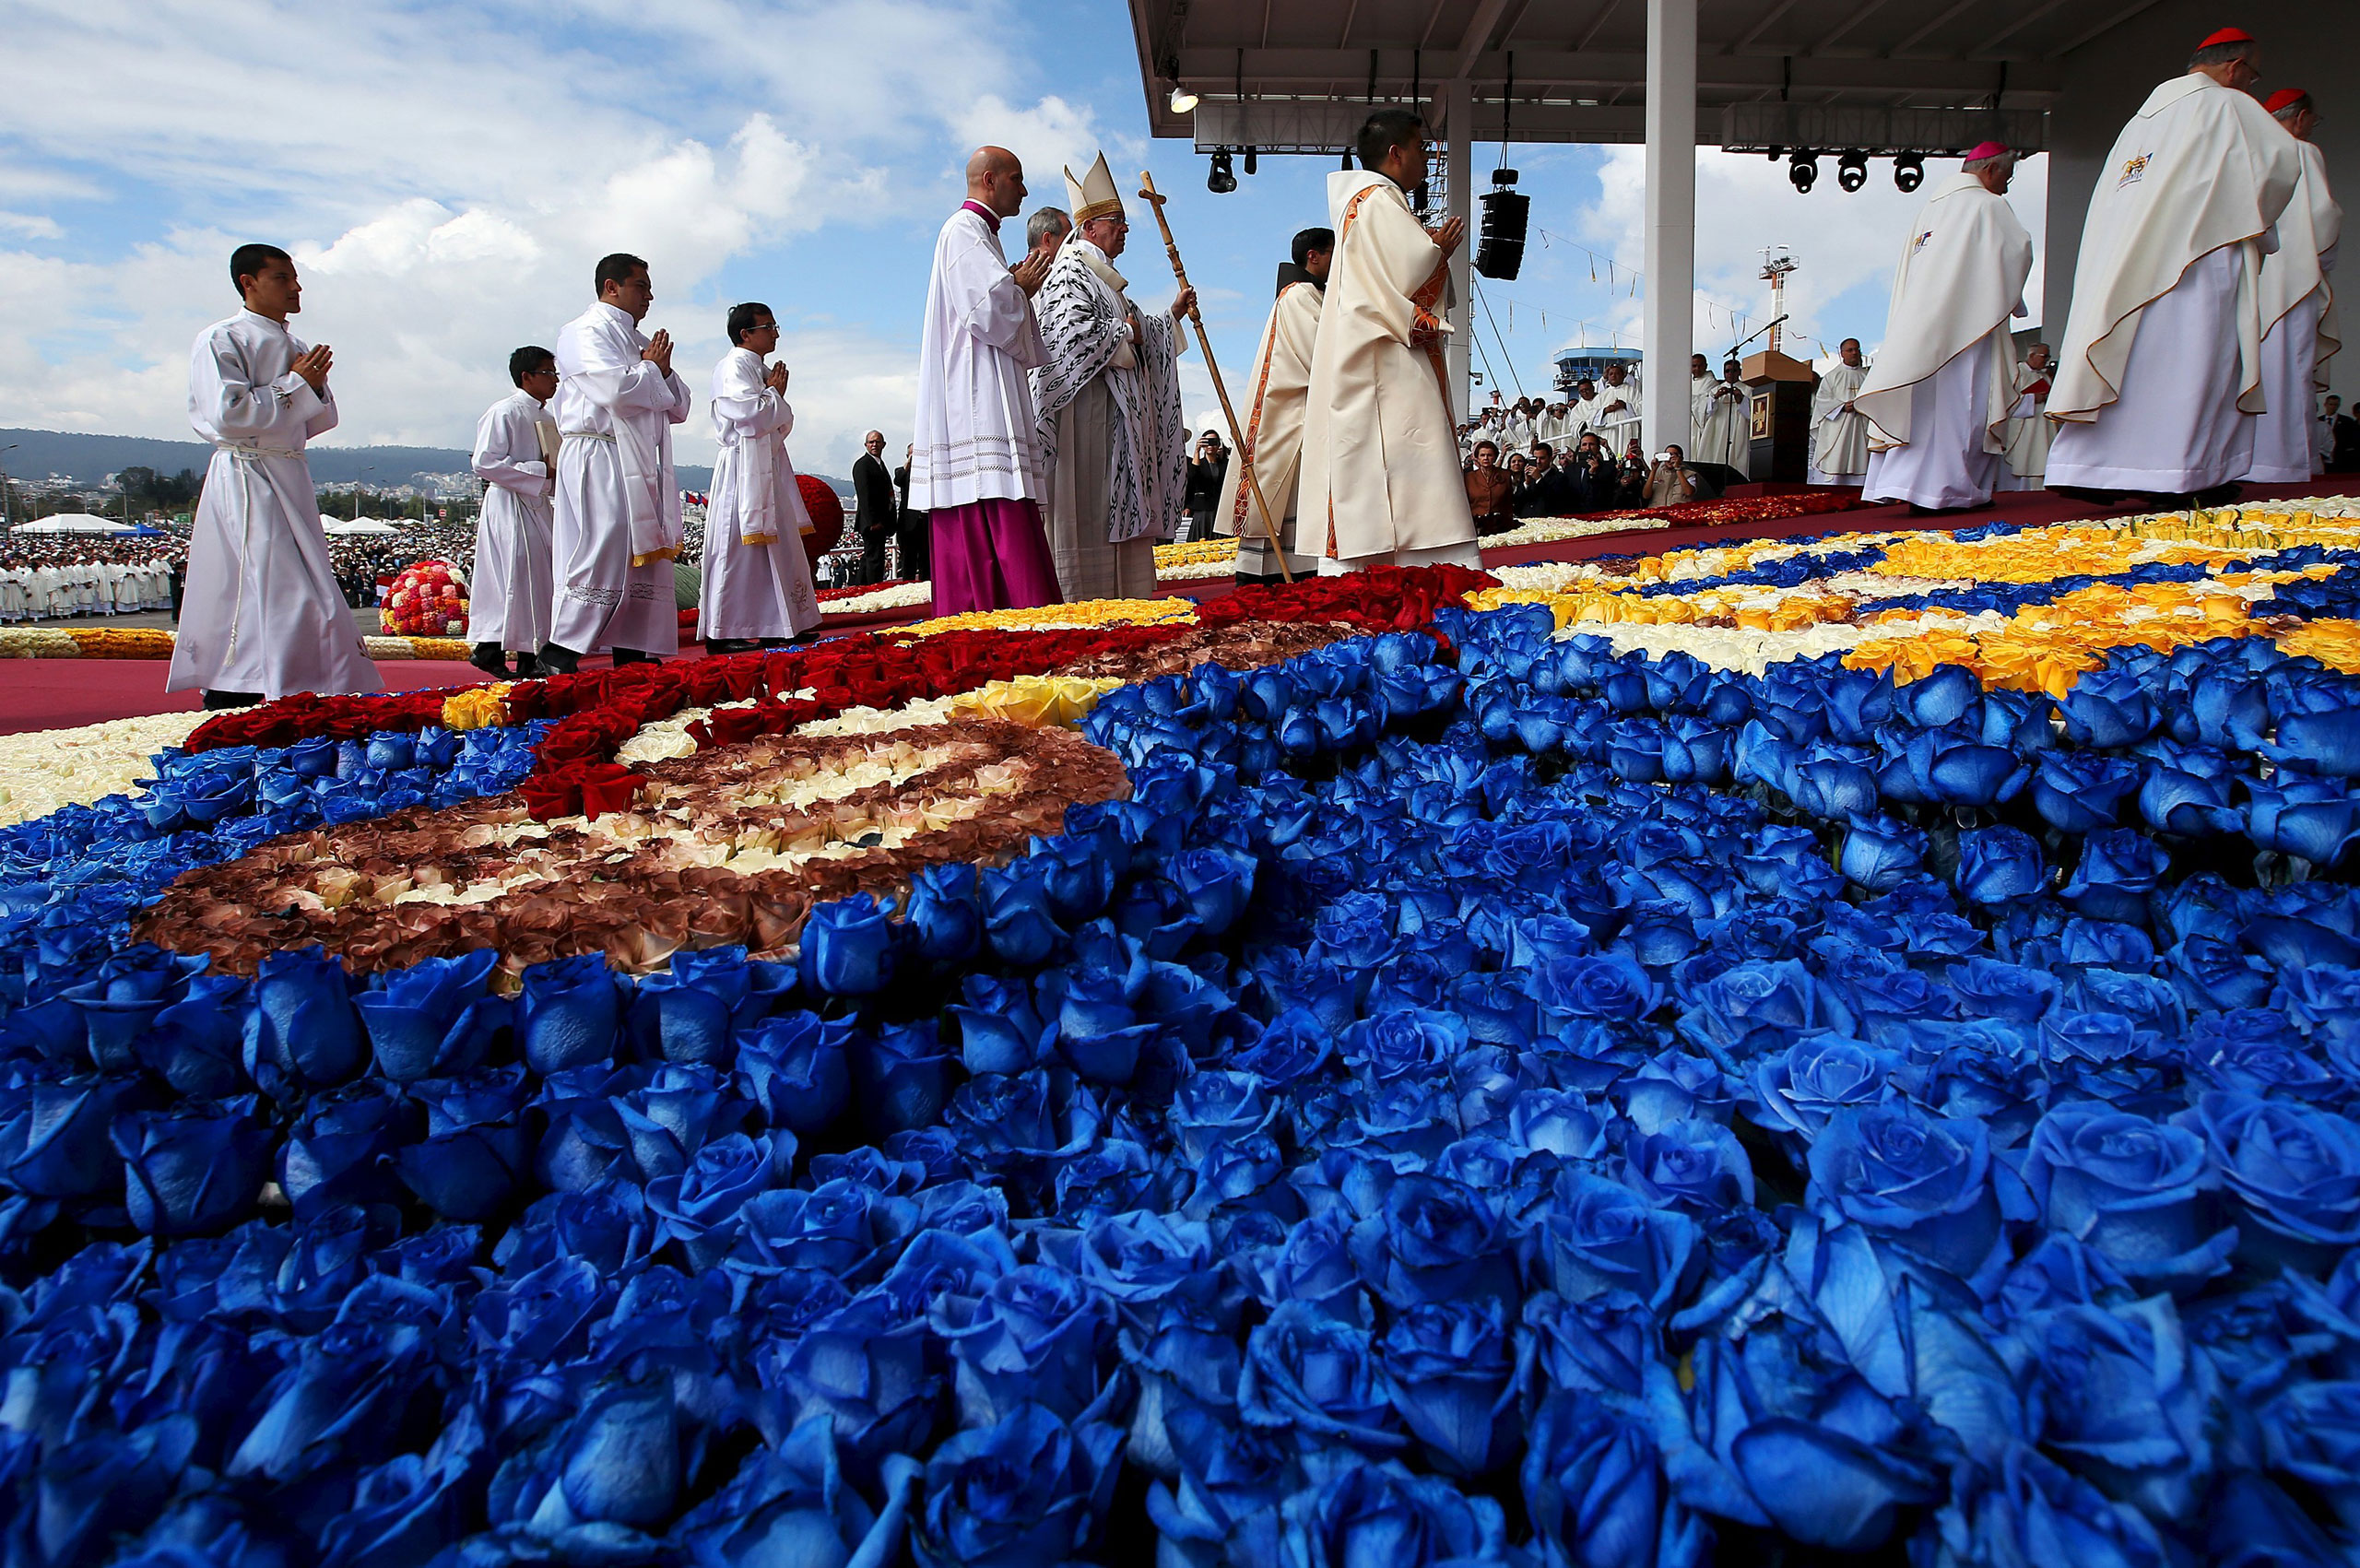 Pope Francis arrives to celebrate mass at the Bicentenario Park in Quito, Ecuador, on July 7, 2015.